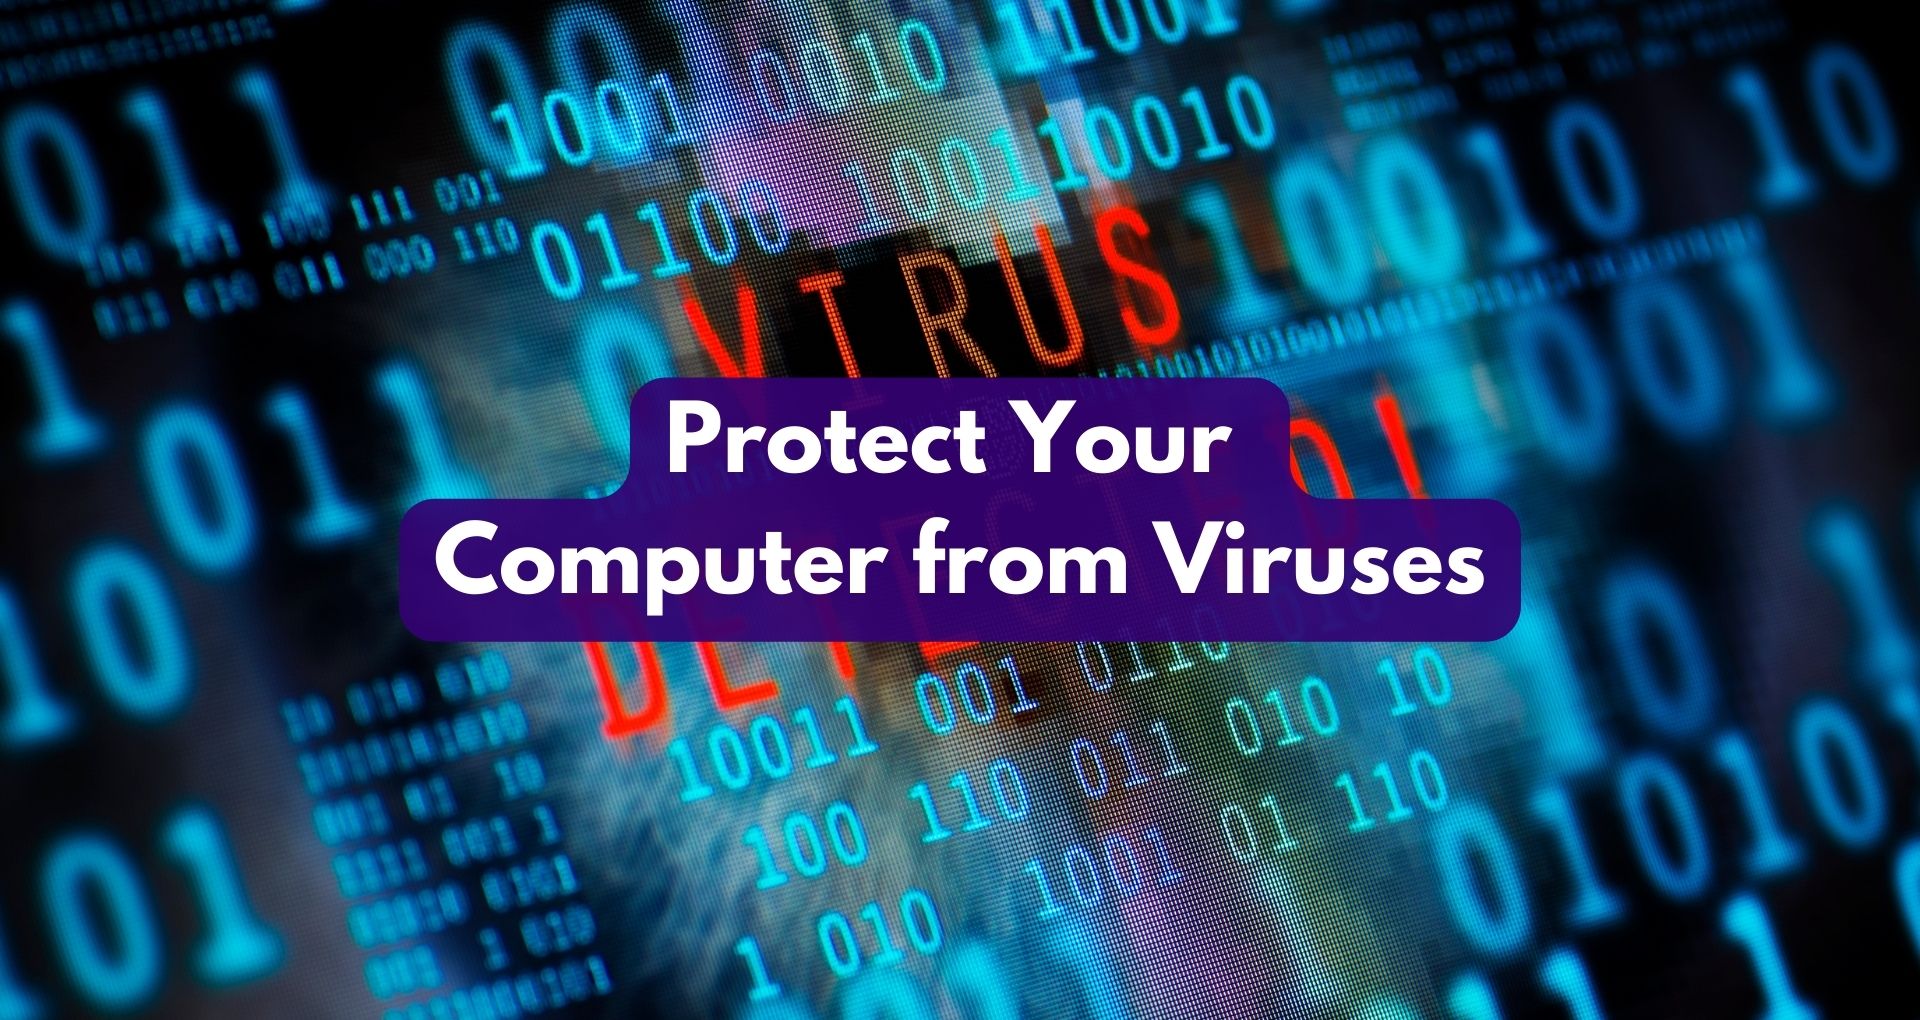 "Protecting Your Computer from Viruses"